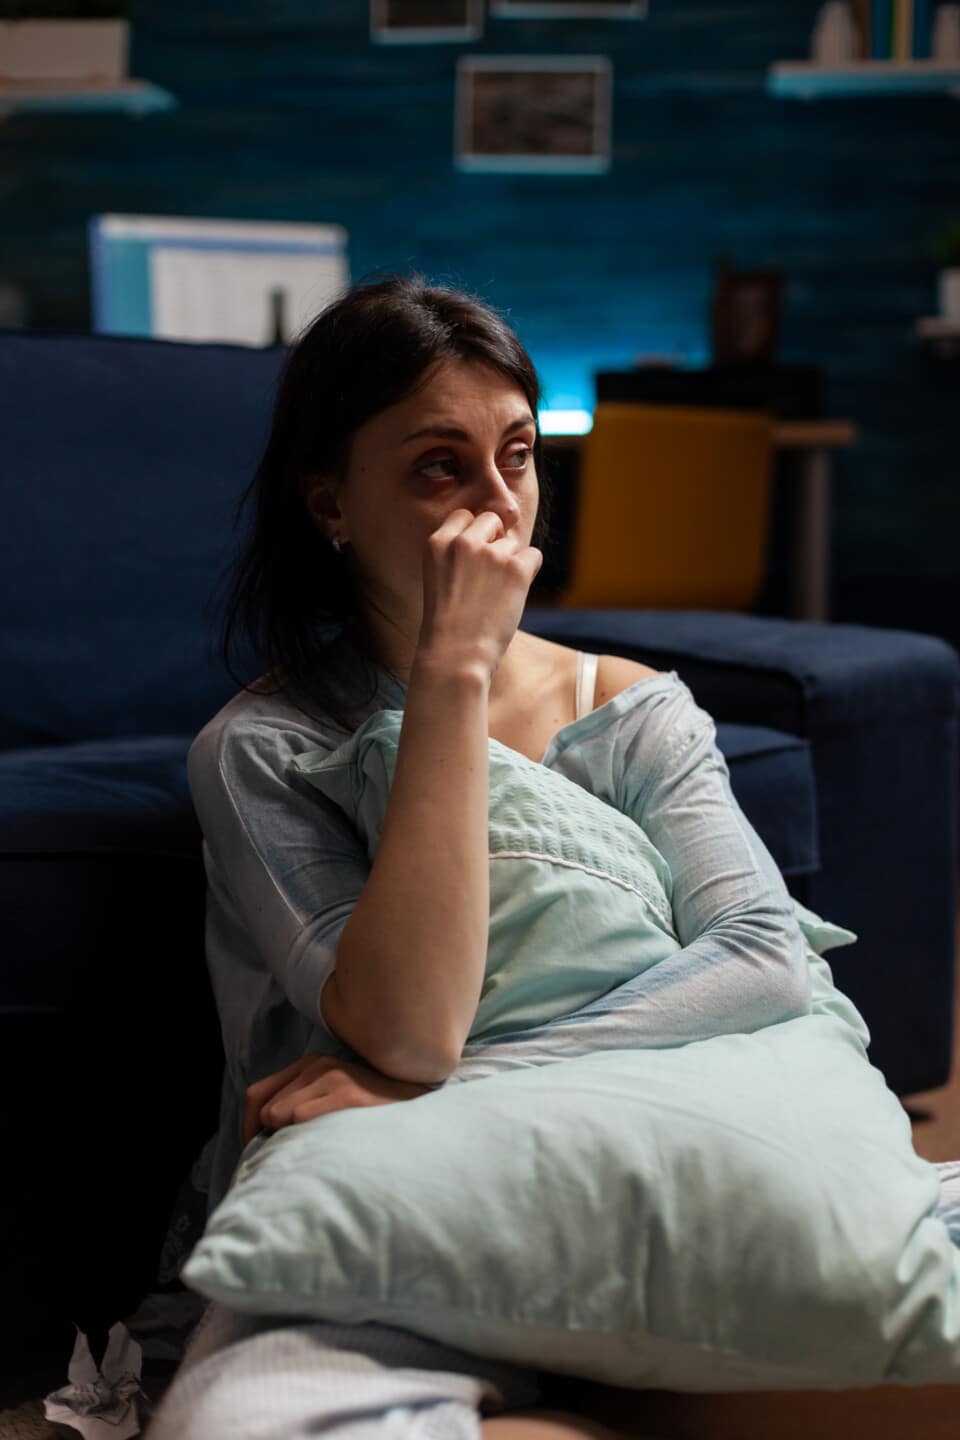 Depressed suicidal woman sitting on living room floor, feeling frustrated and having chronic mental disease difficulties. Anxious female person dealing with sadness and negativity.